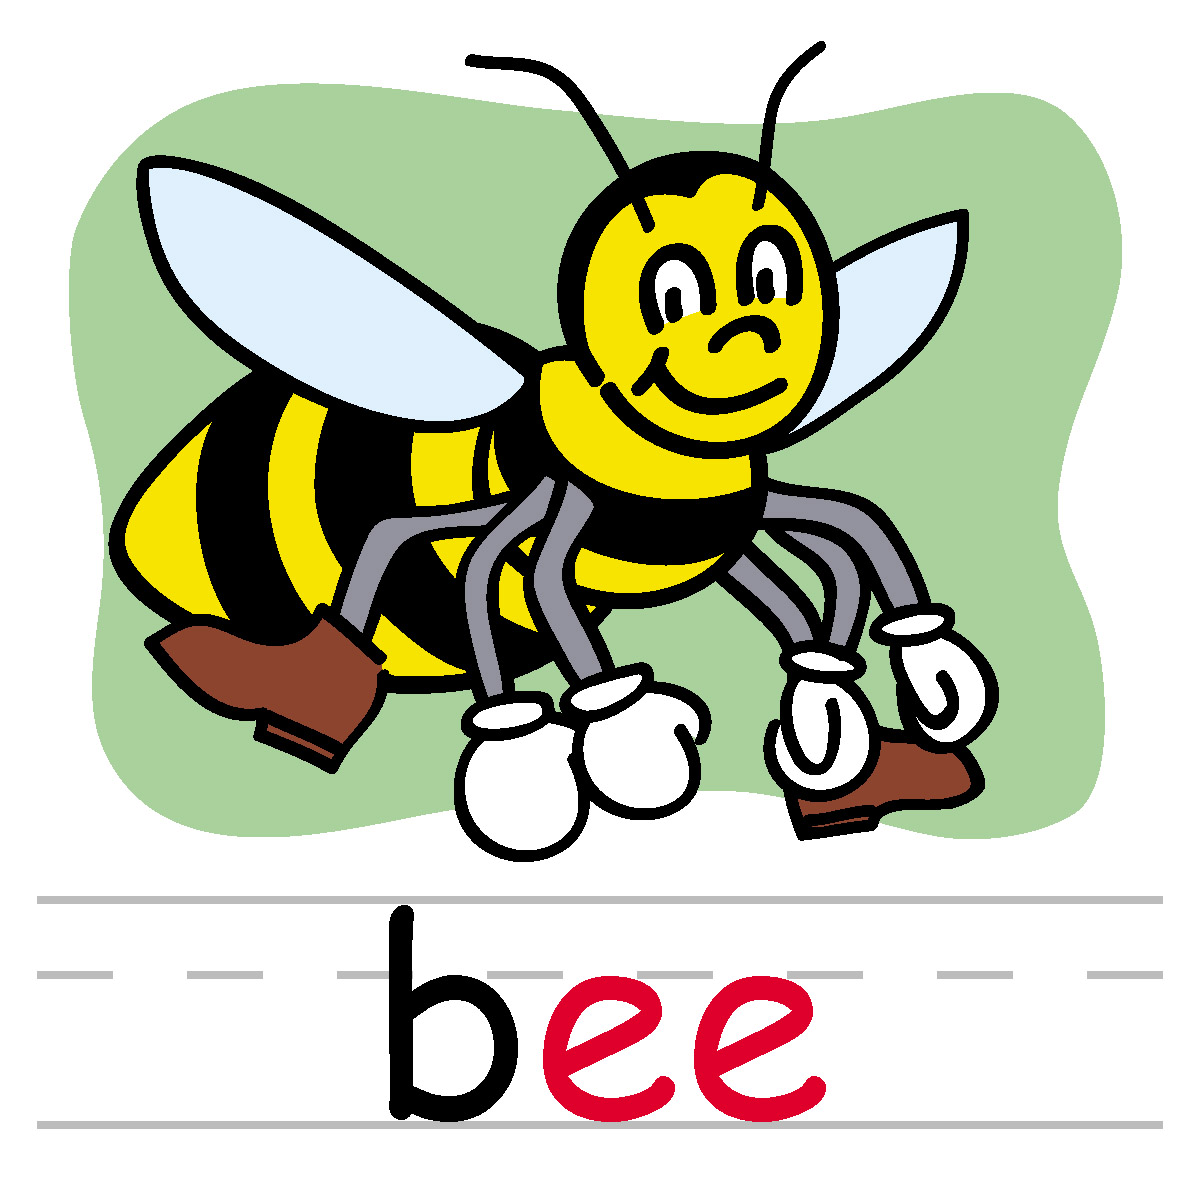 spelling bee clip art images - photo #23